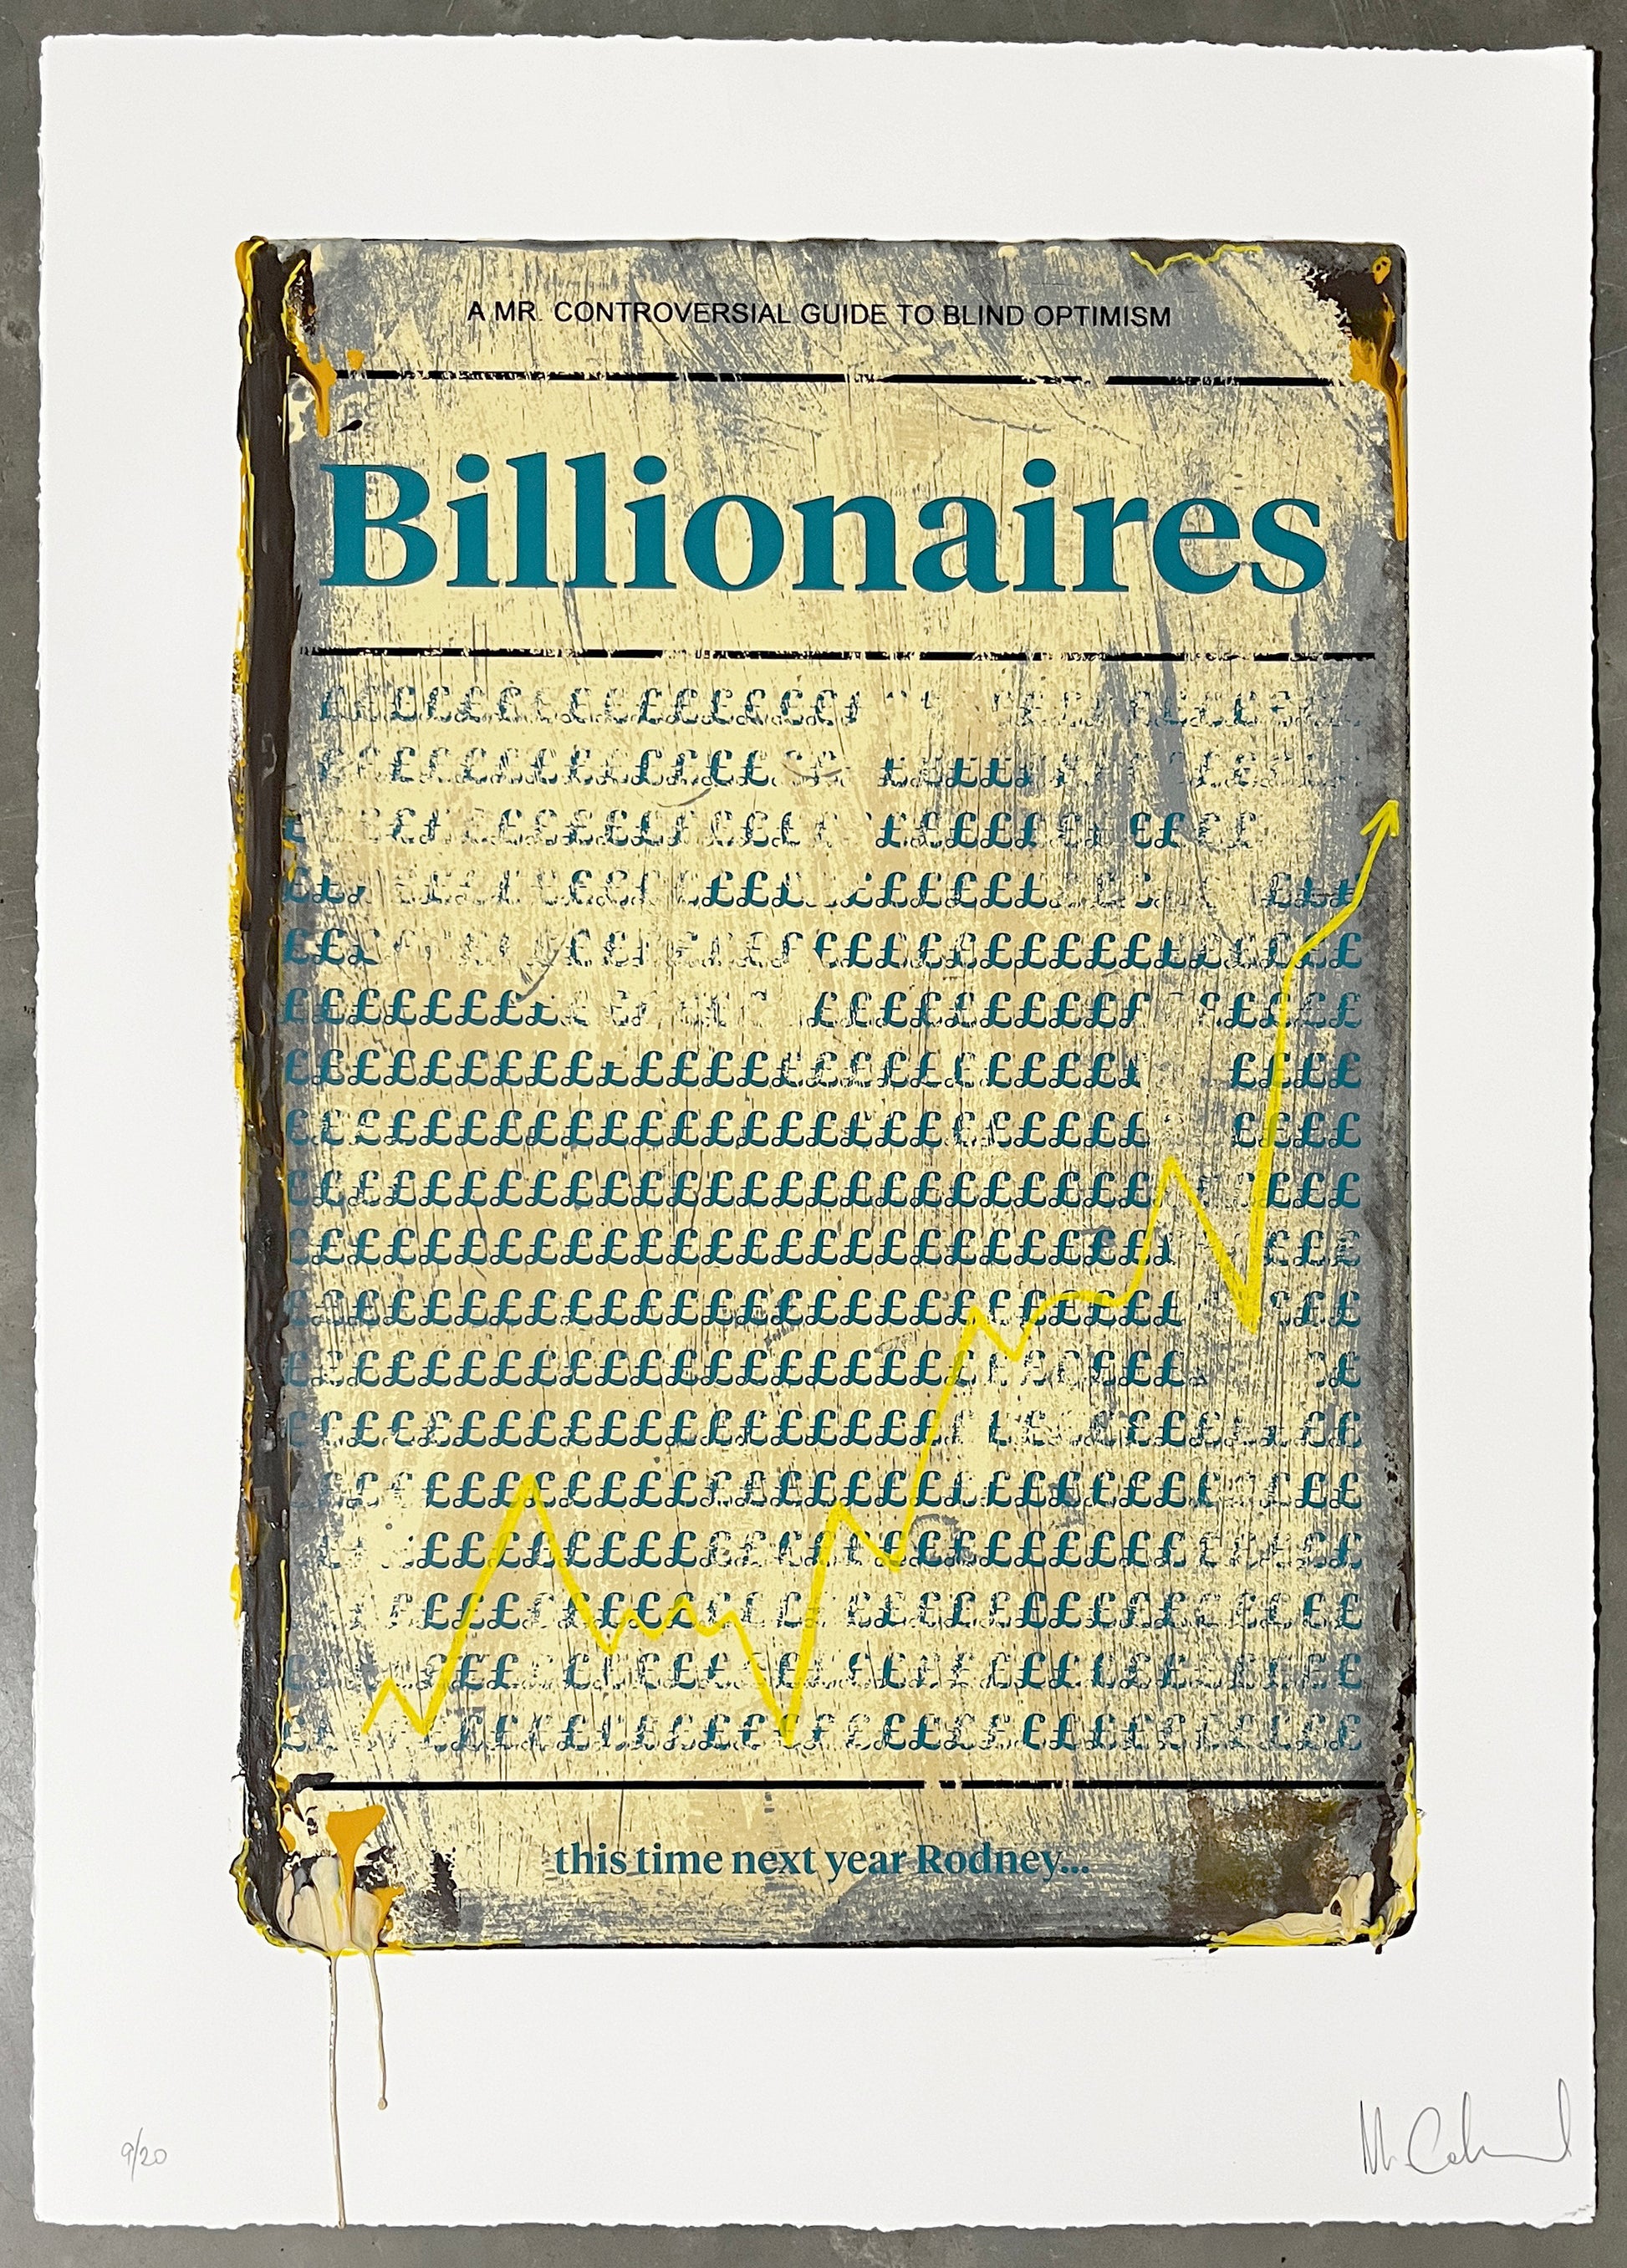 Mr Controversial, Artist, Billionaires, Edition 9 Hand-finished, Success, TAP Galleries, Essex Chelmsford Art Gallery 